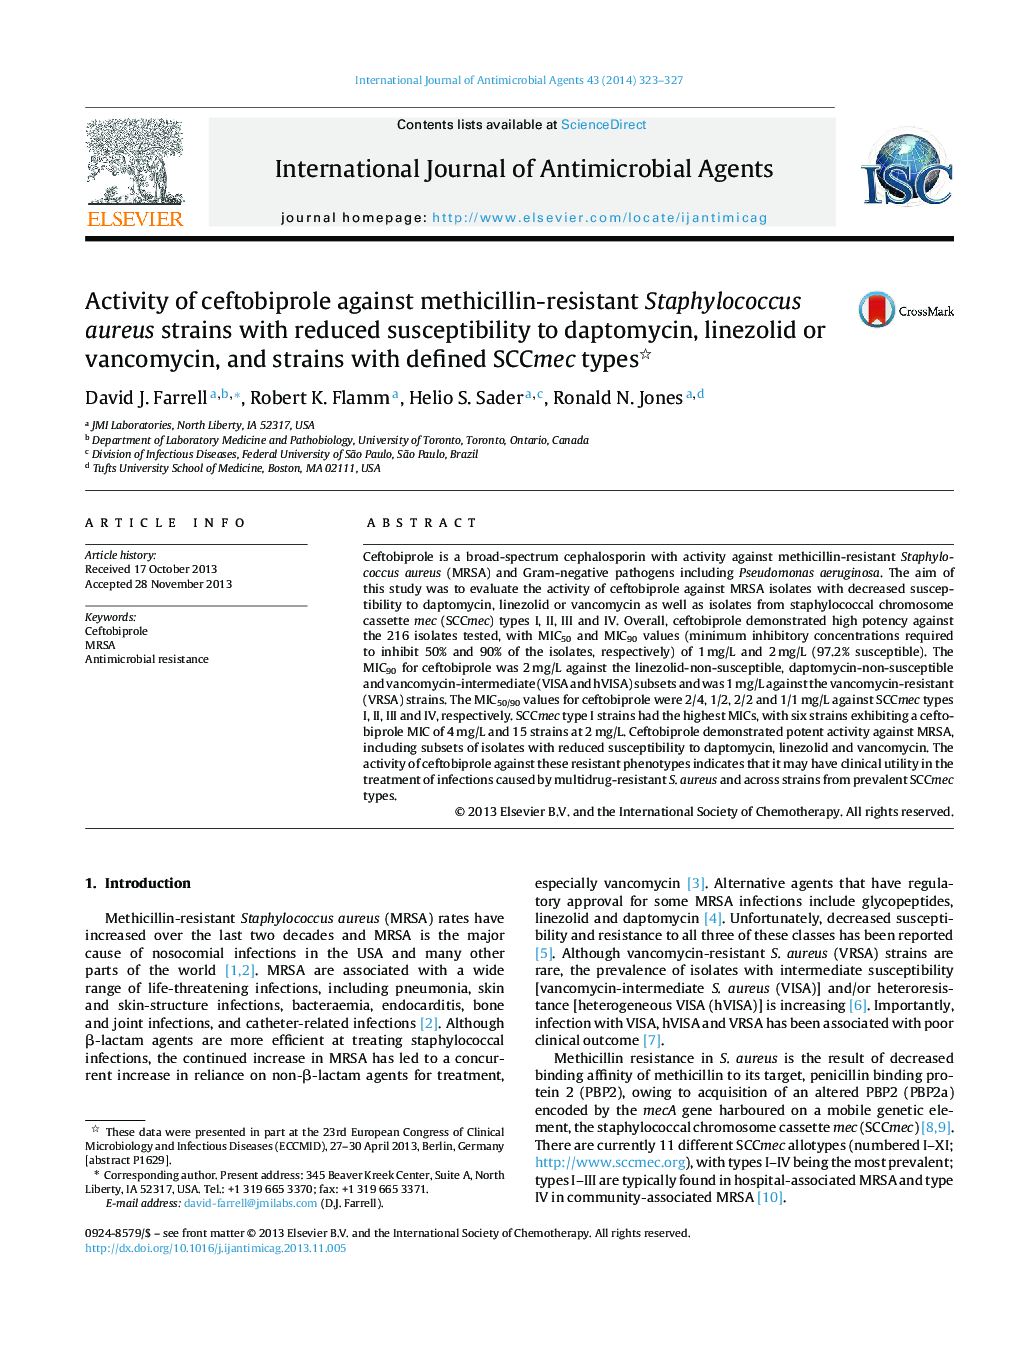 Activity of ceftobiprole against methicillin-resistant Staphylococcus aureus strains with reduced susceptibility to daptomycin, linezolid or vancomycin, and strains with defined SCCmec types